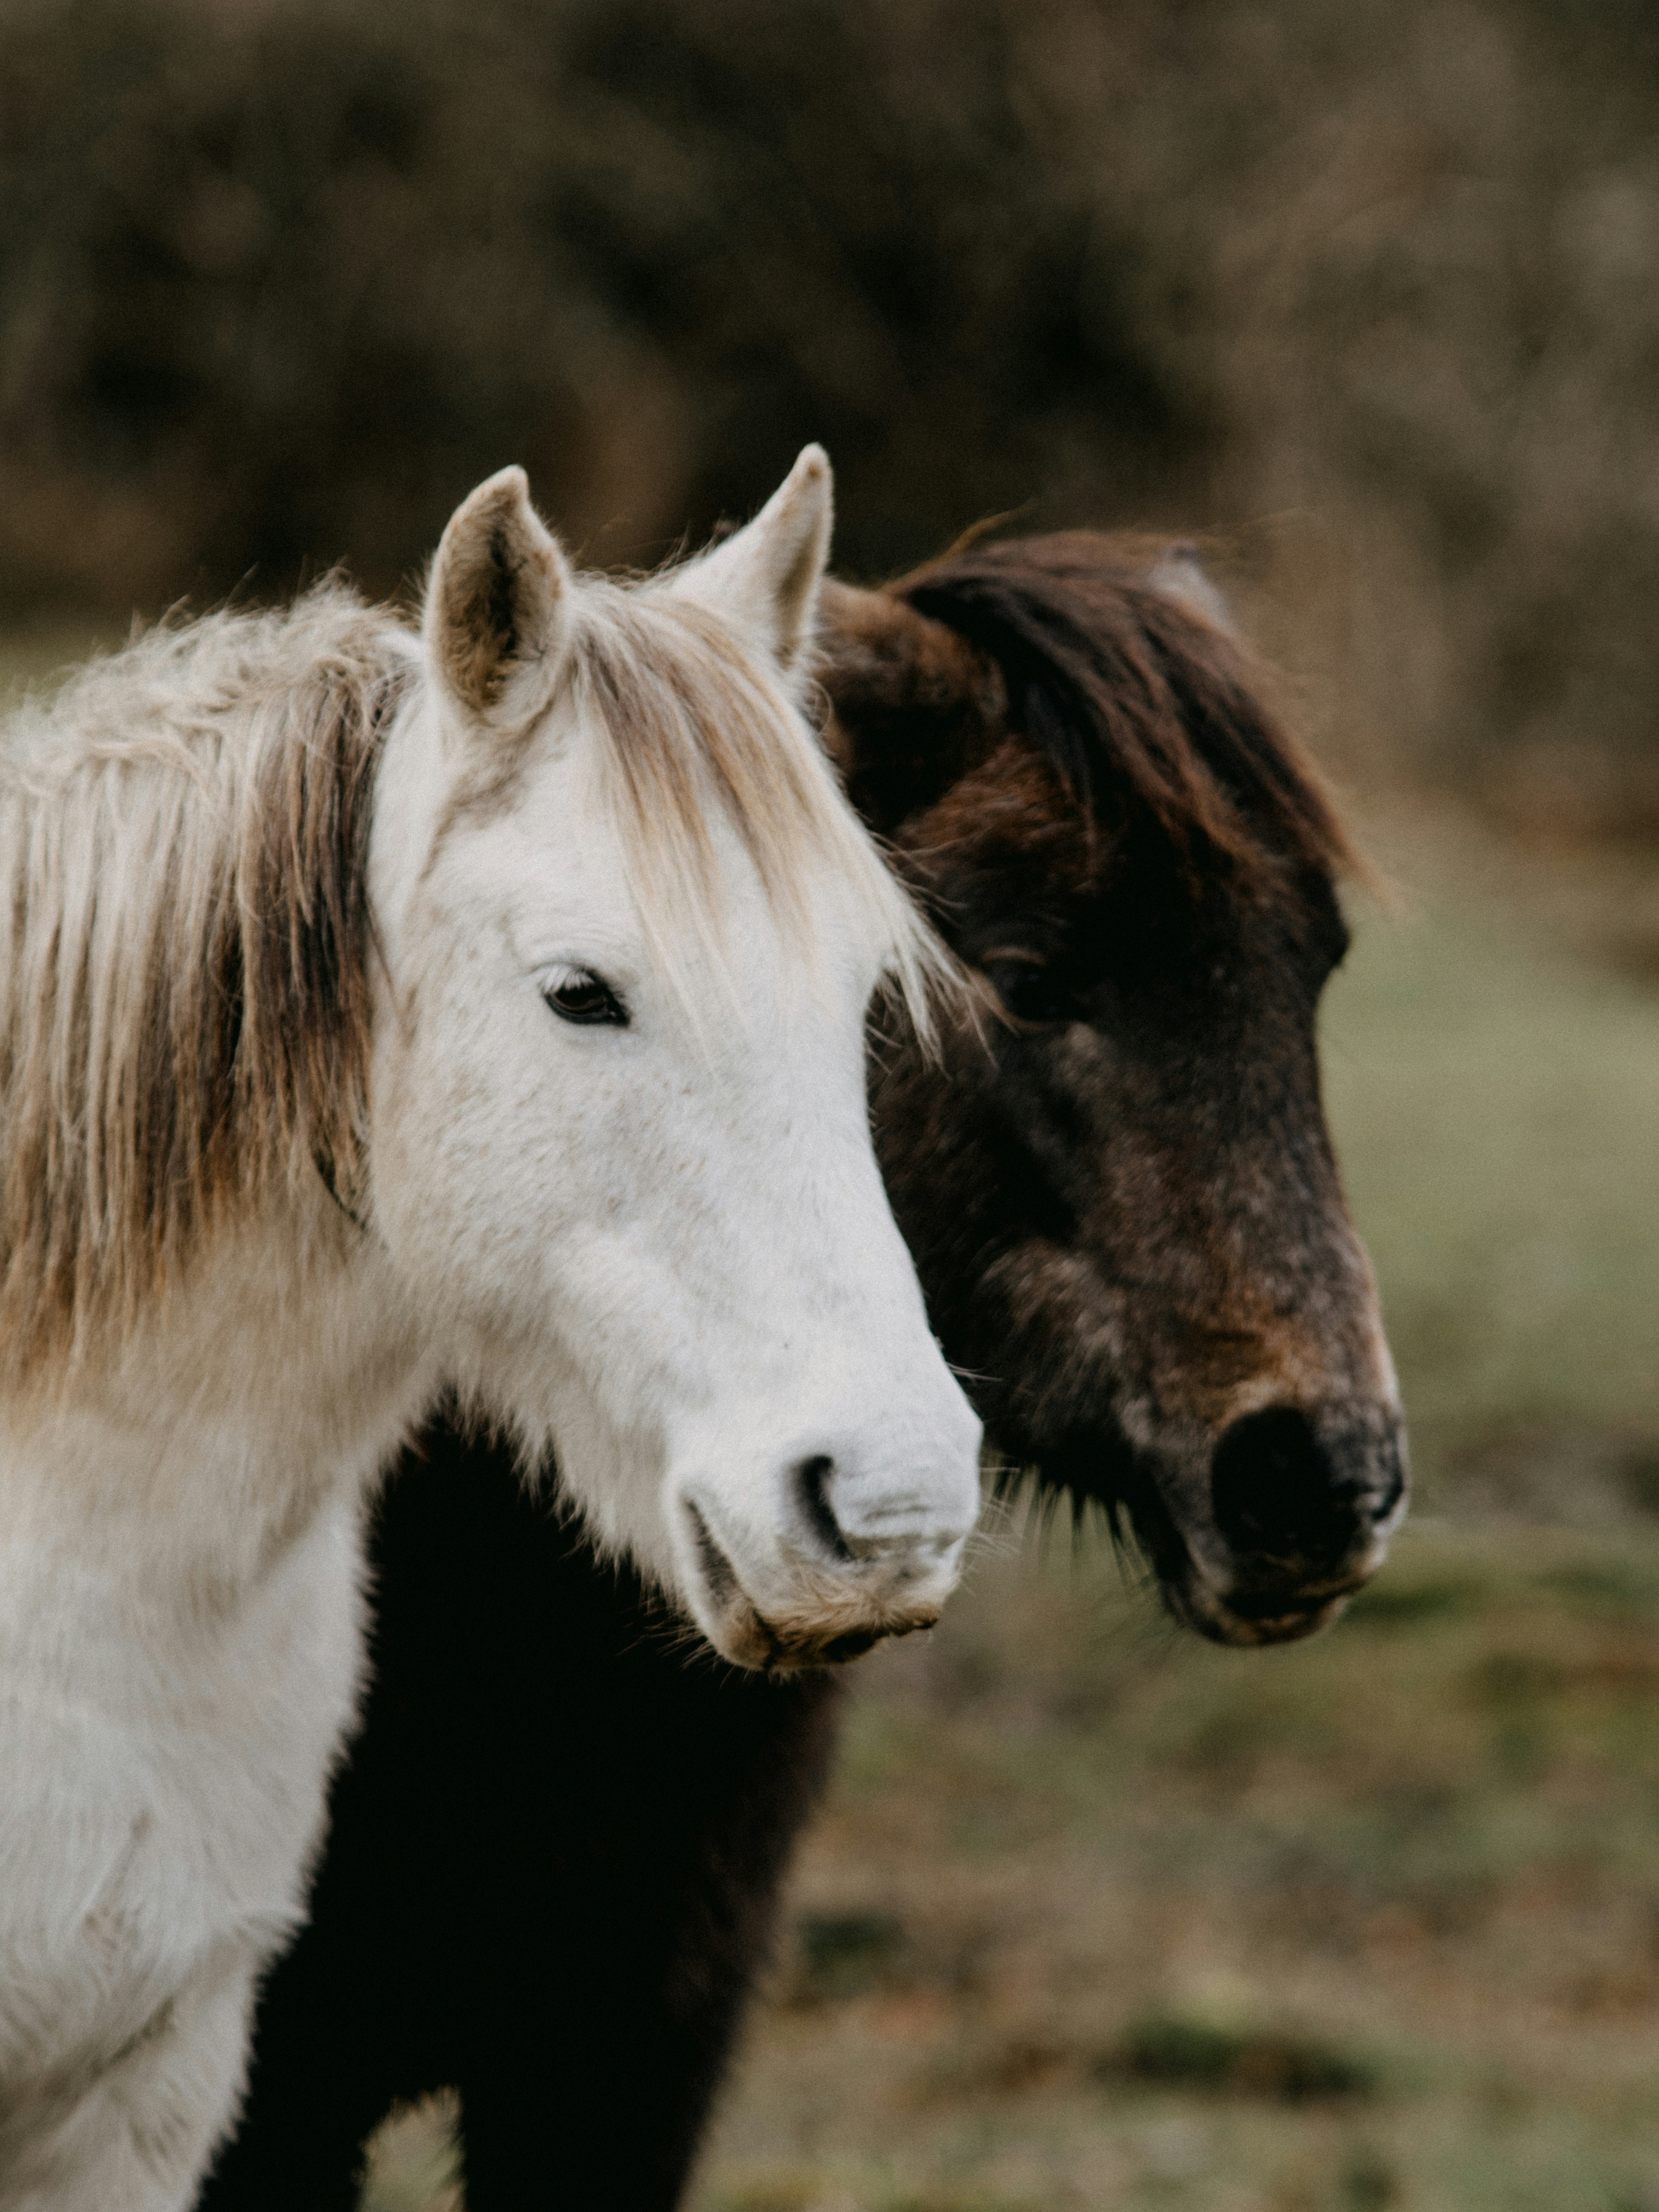 white and brown horse in close up photography during daytime